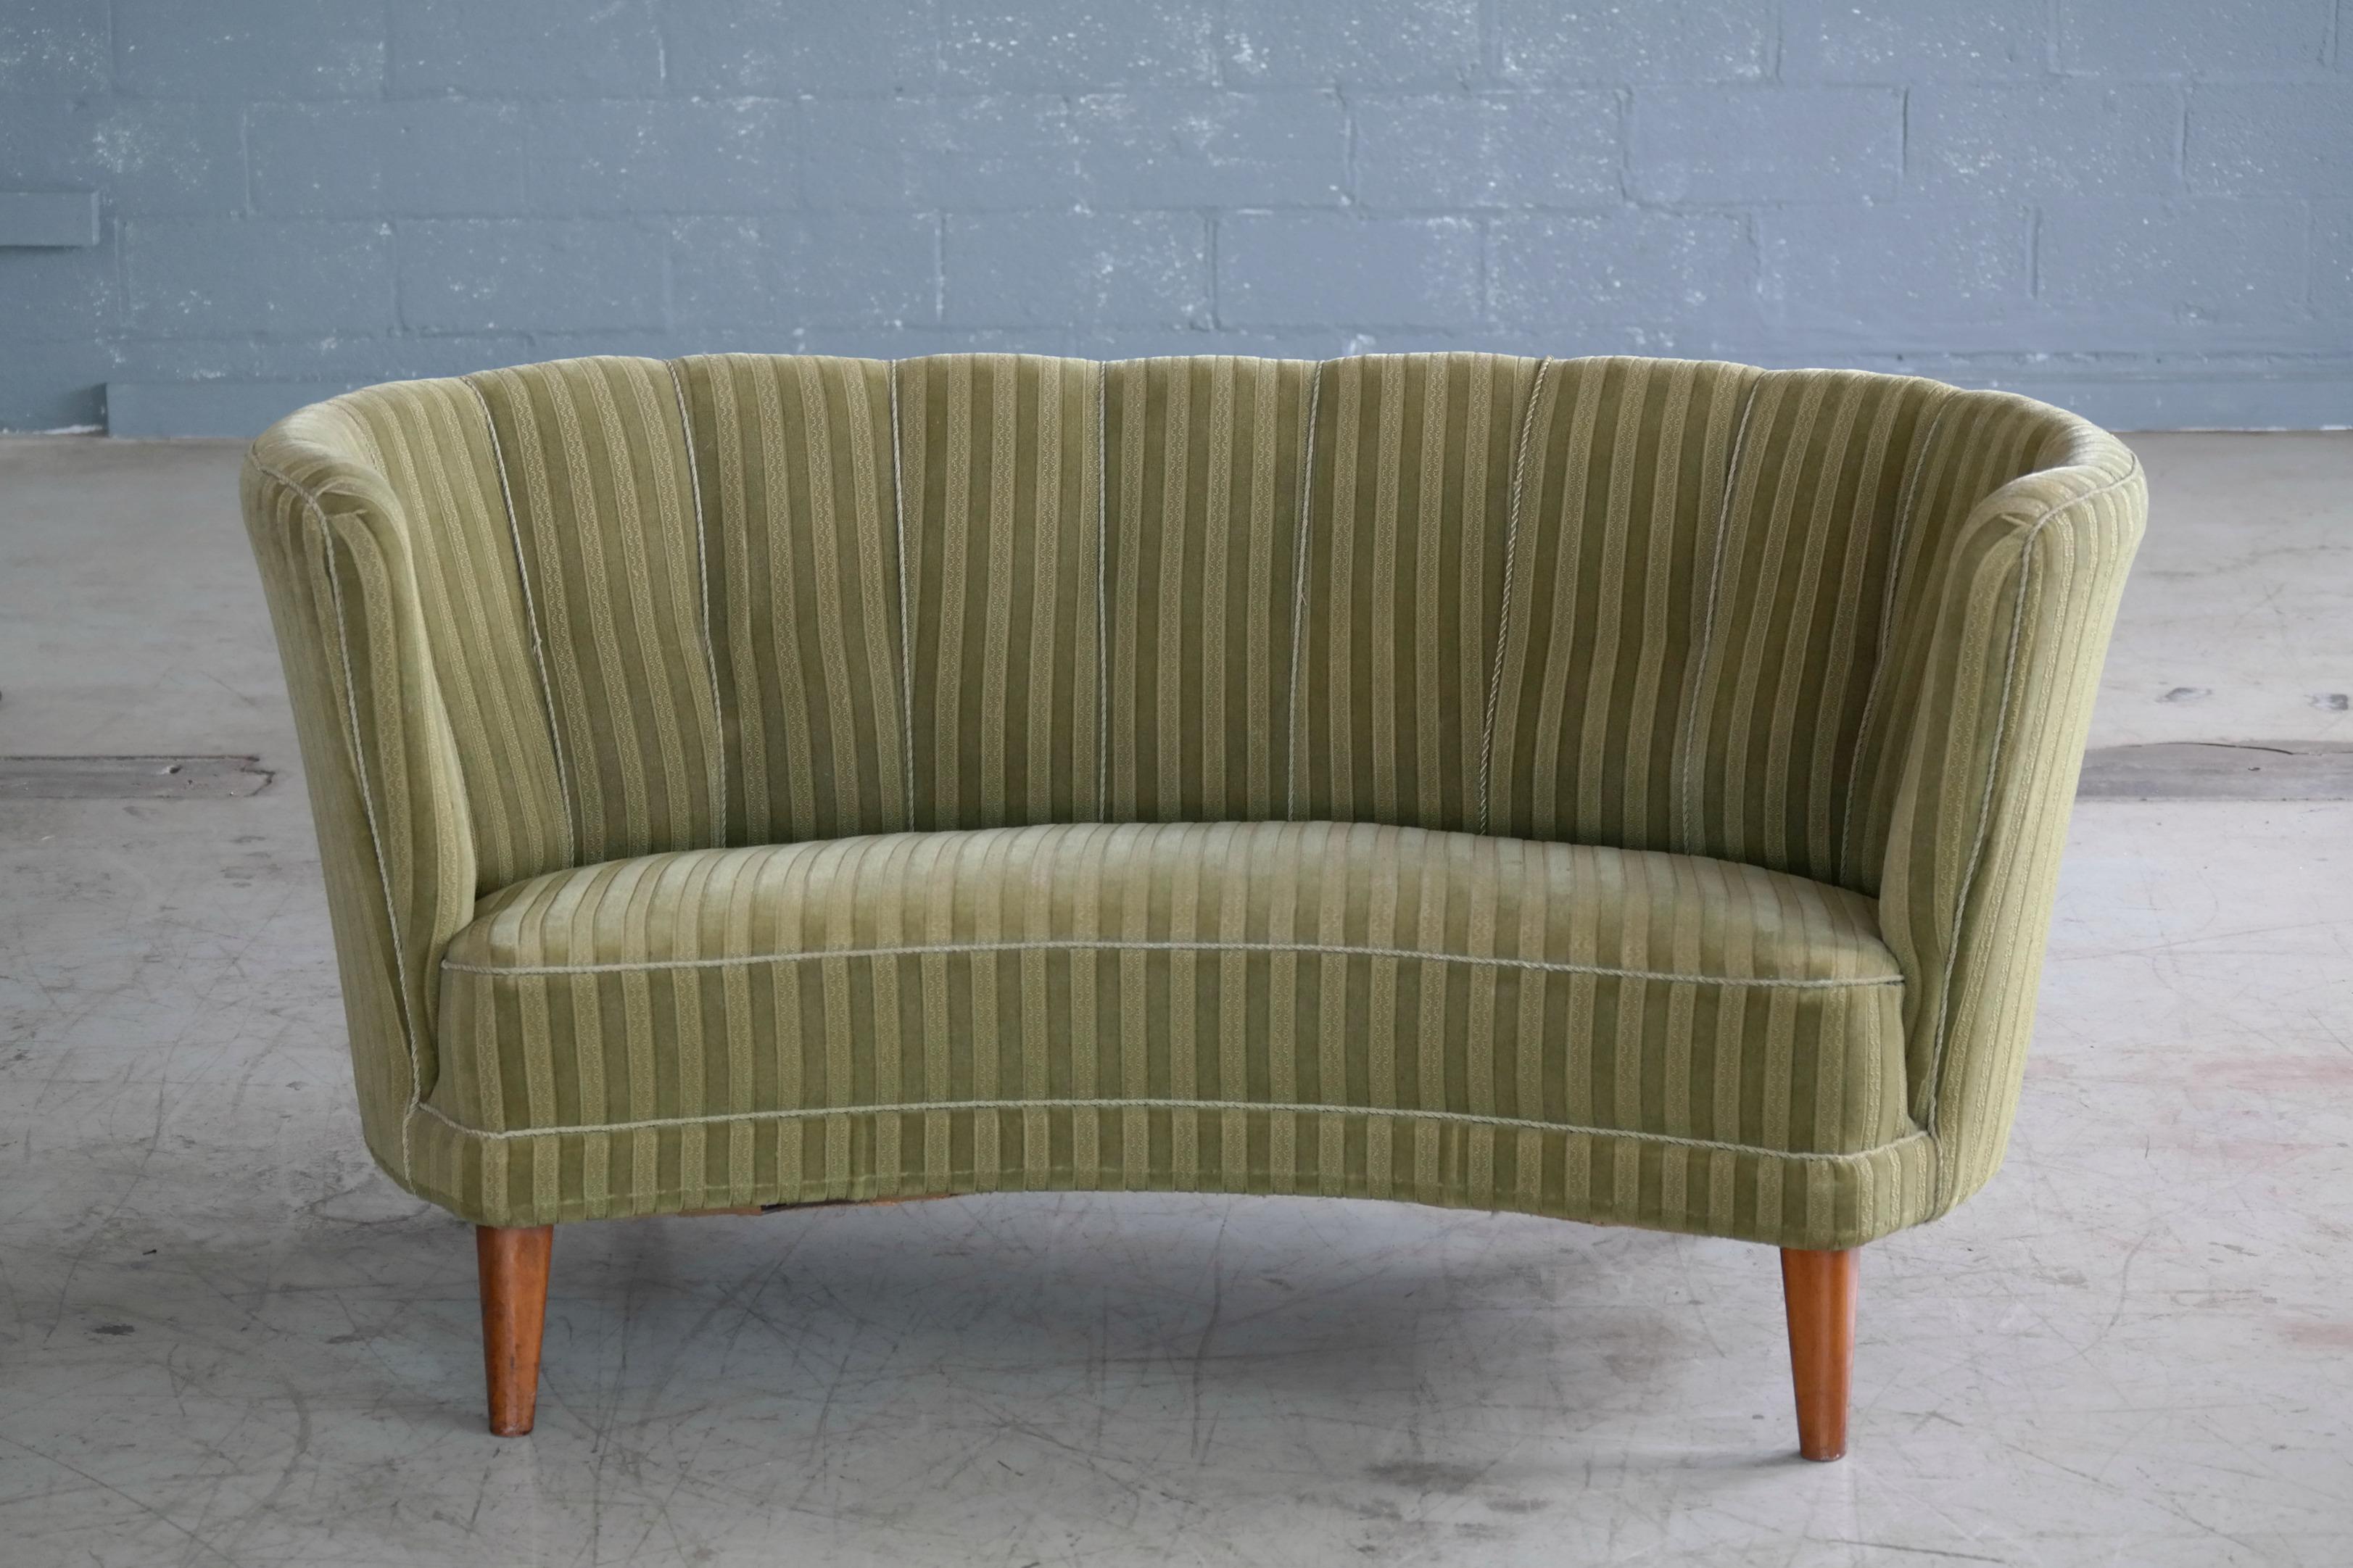 Scandinavian Modern Danish Midcentury Curved or Banana Form Sofa or Loveseat in Beech and Mohair